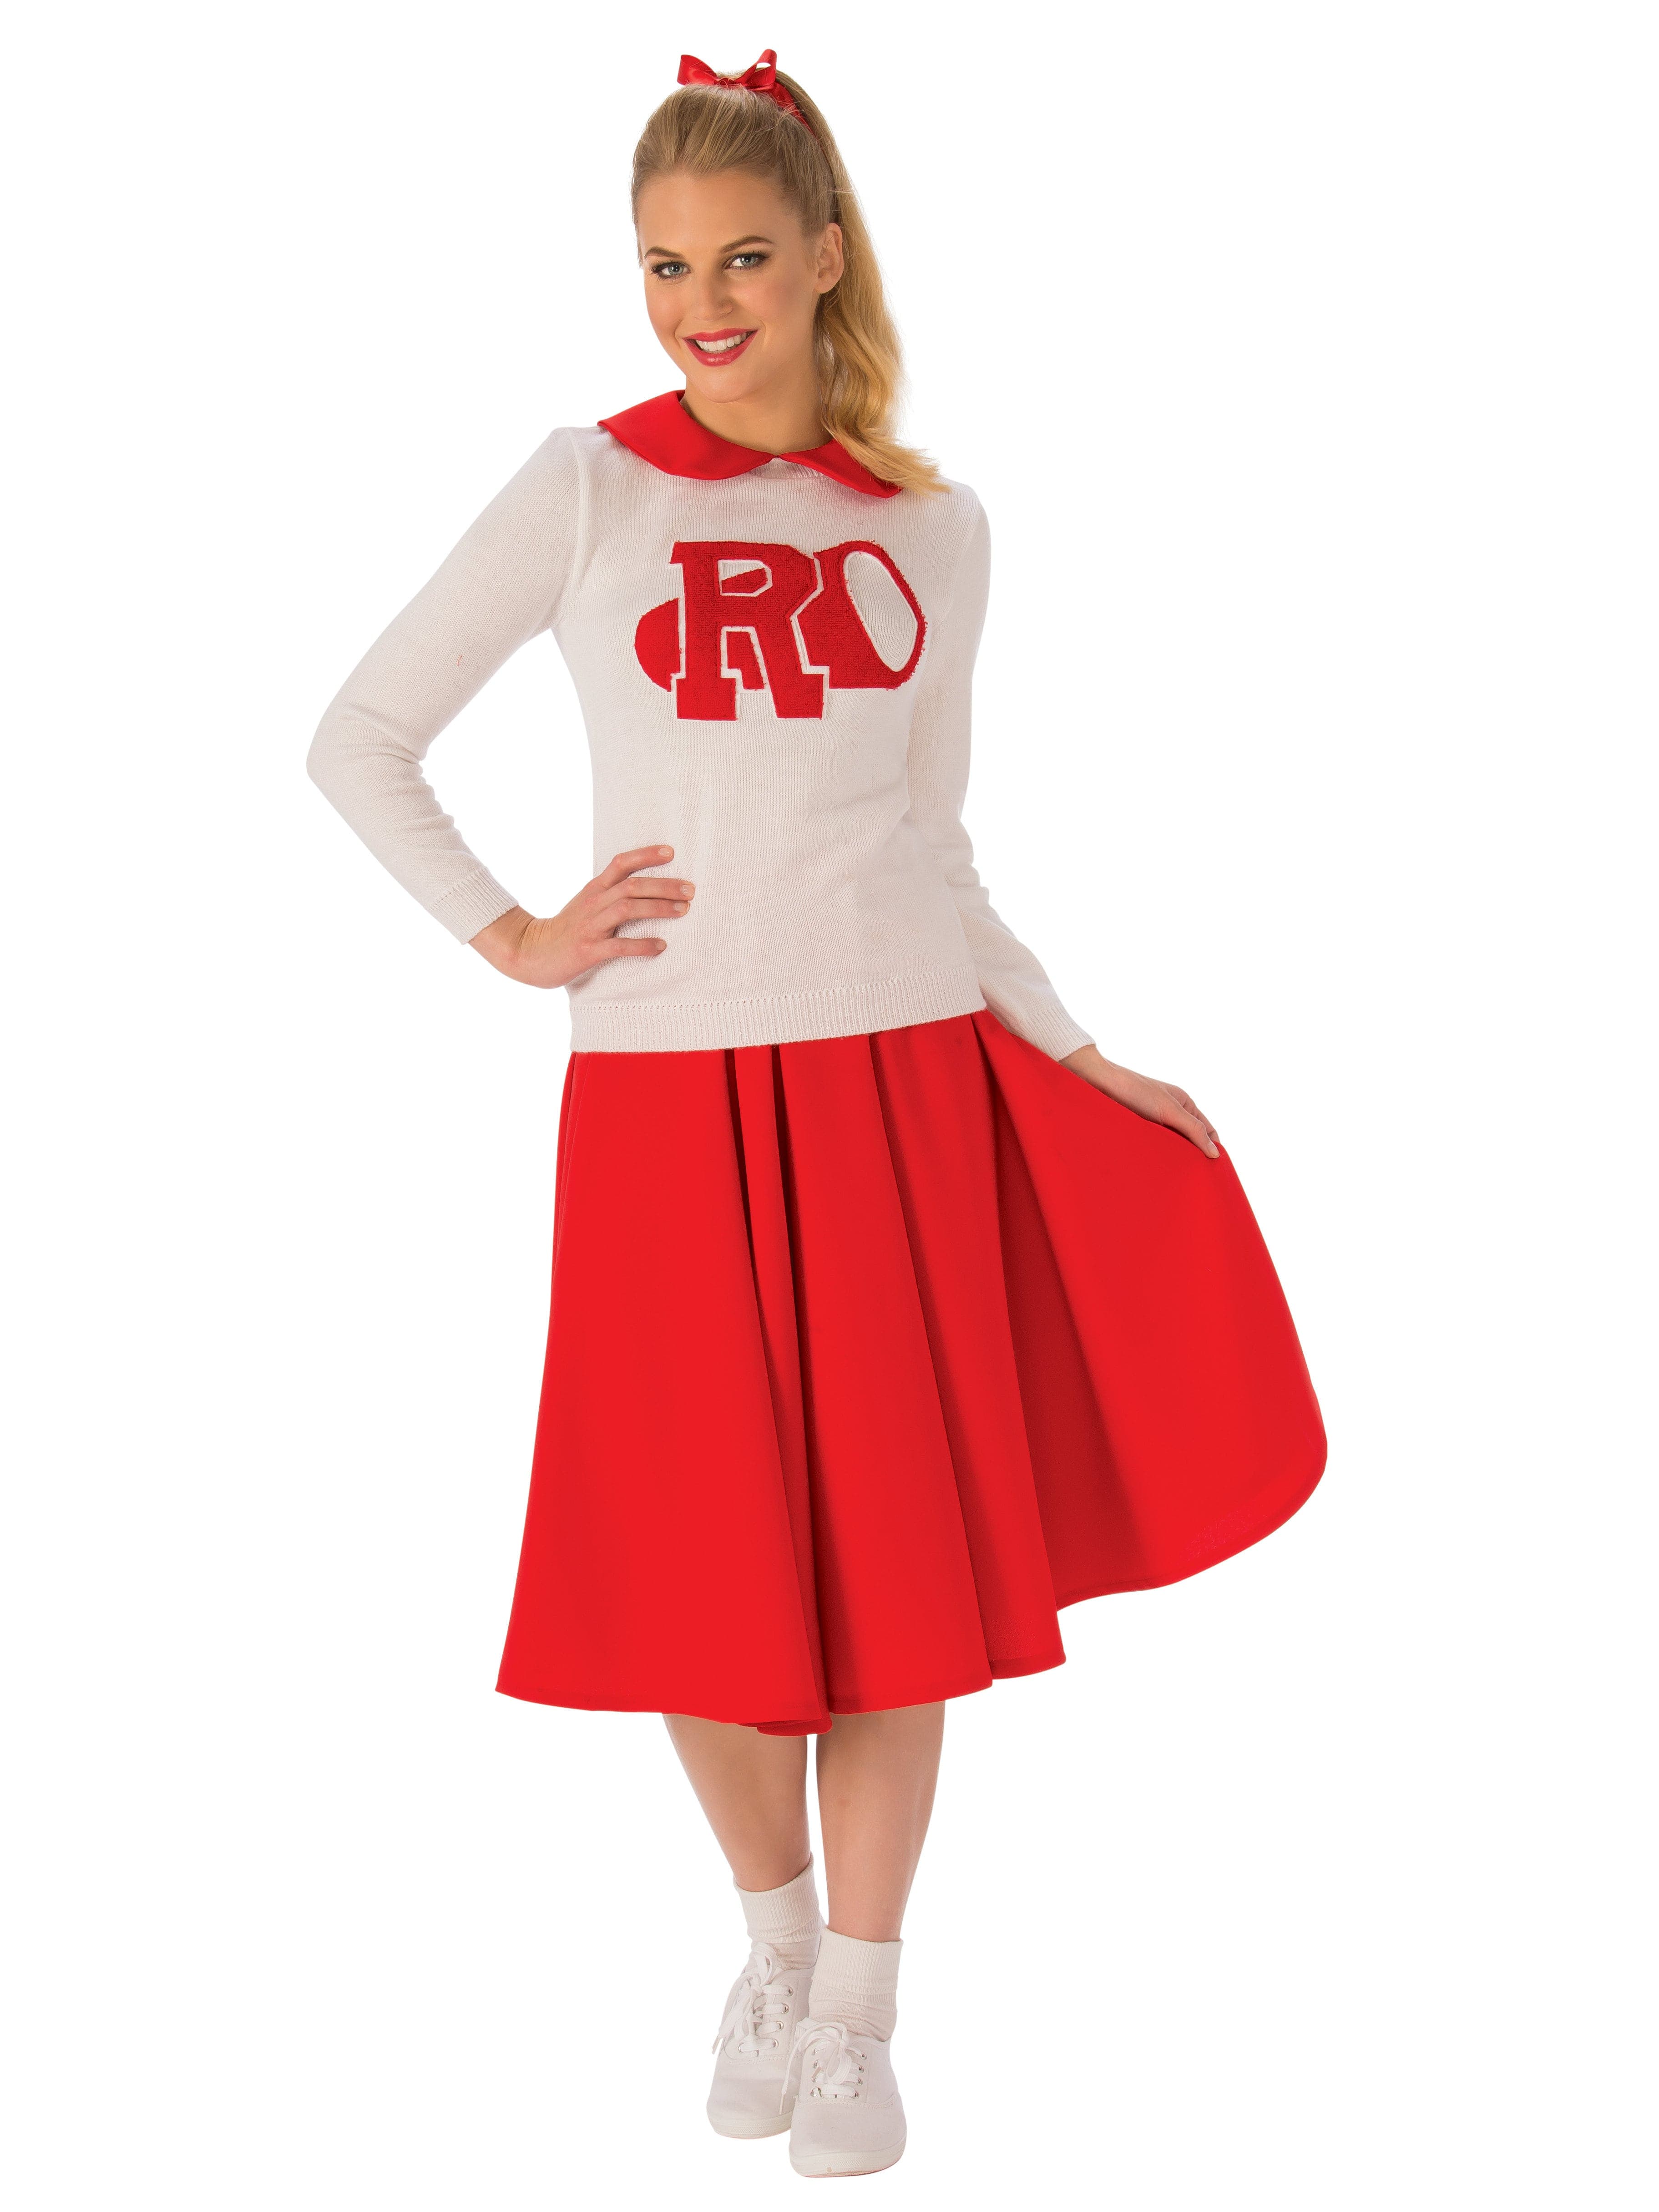 Adult Grease Rydell High Cheerleaders Costume - costumes.com